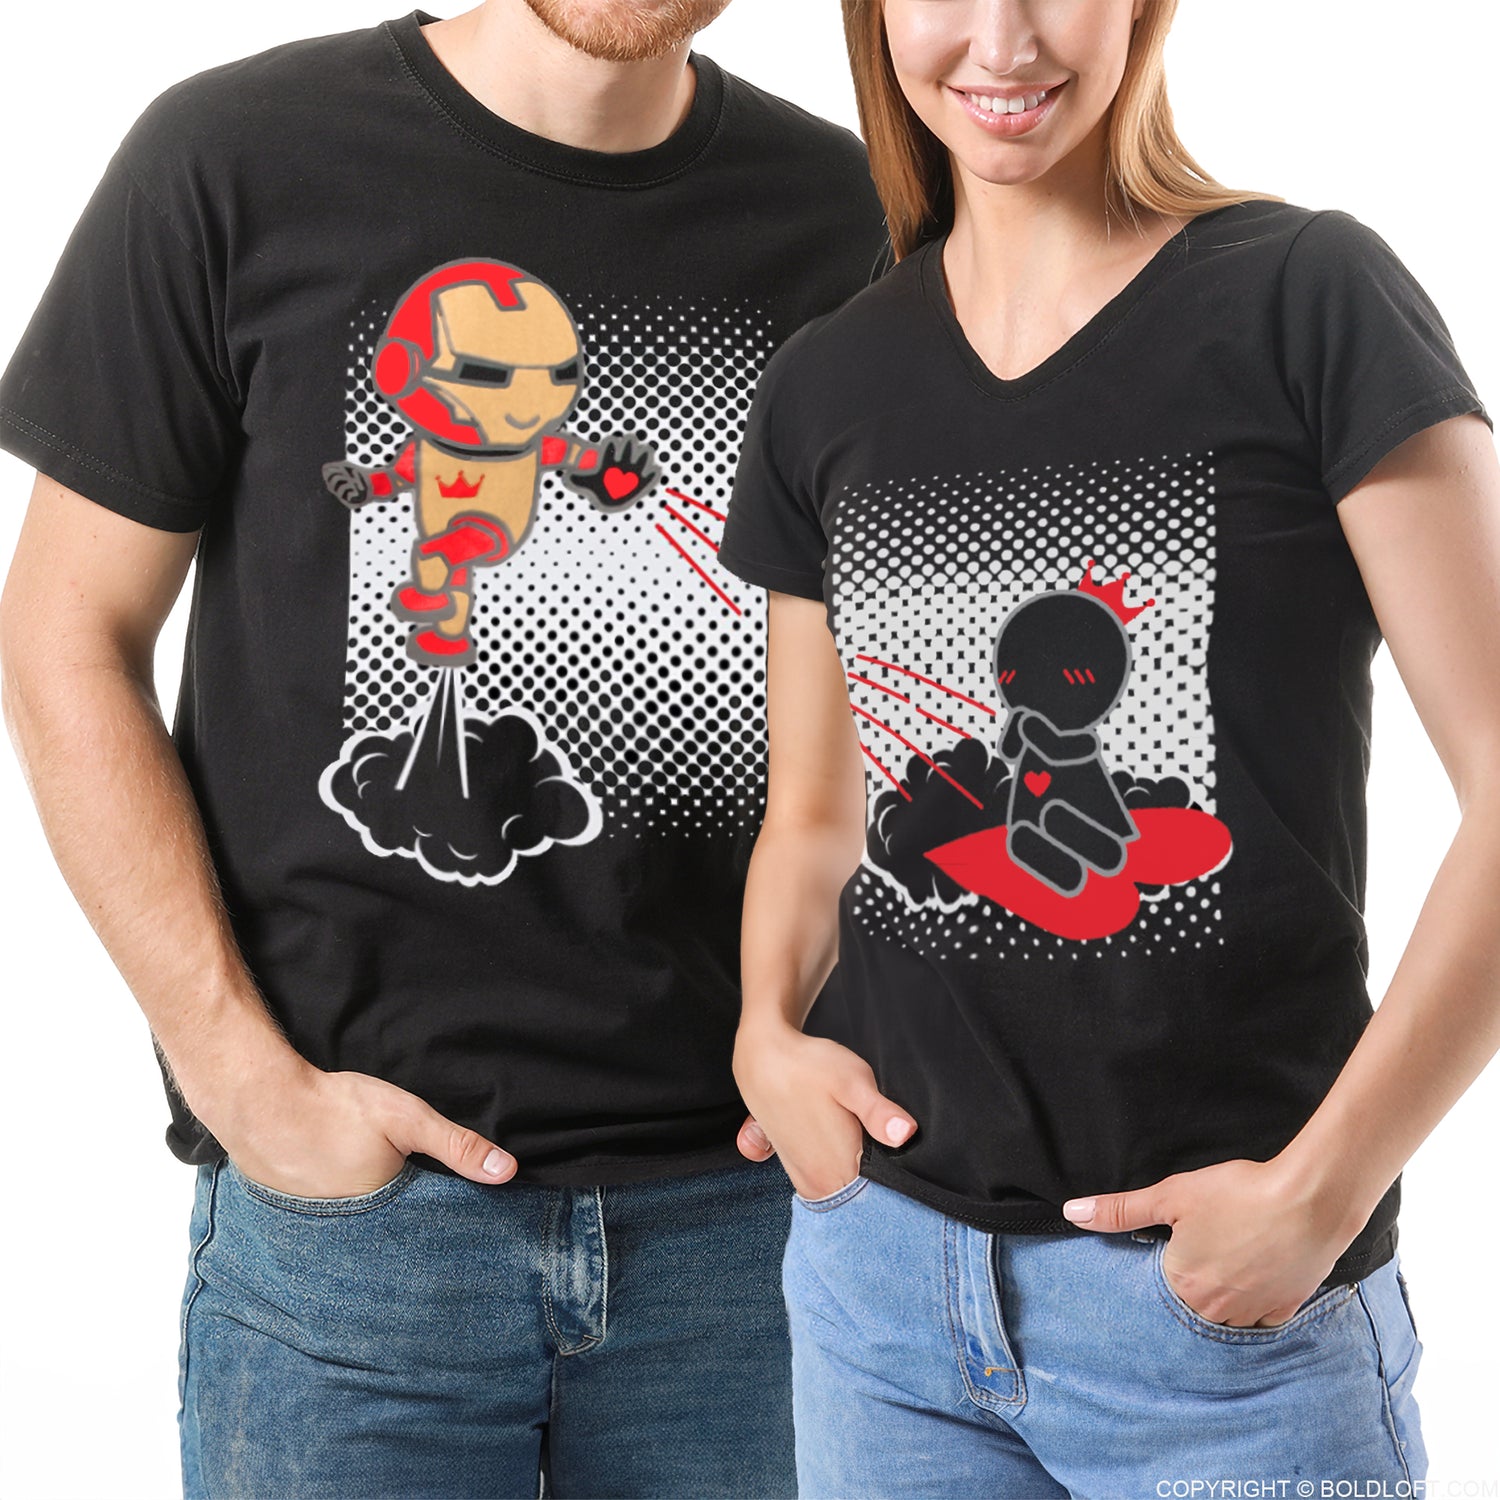 Love You 3000™ His &amp; Hers Matching Couple Shirts Black Iron Superhero Shirts for Him Her